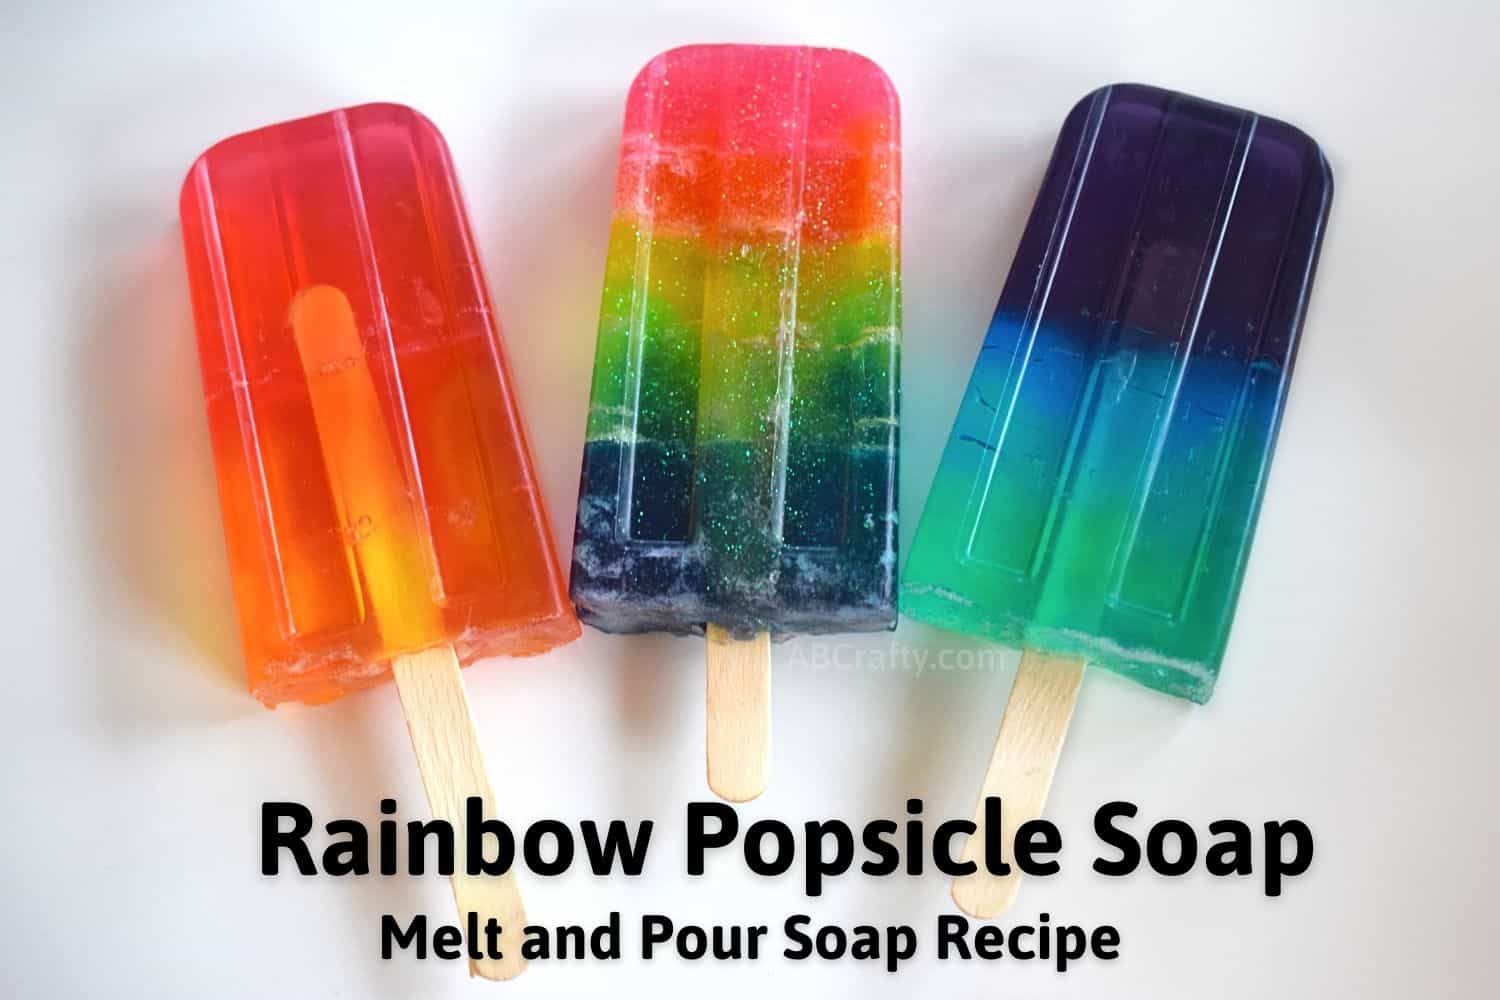 39 Easy Melt and Pour Soap Recipes for Beginners - The Crafty Blog Stalker